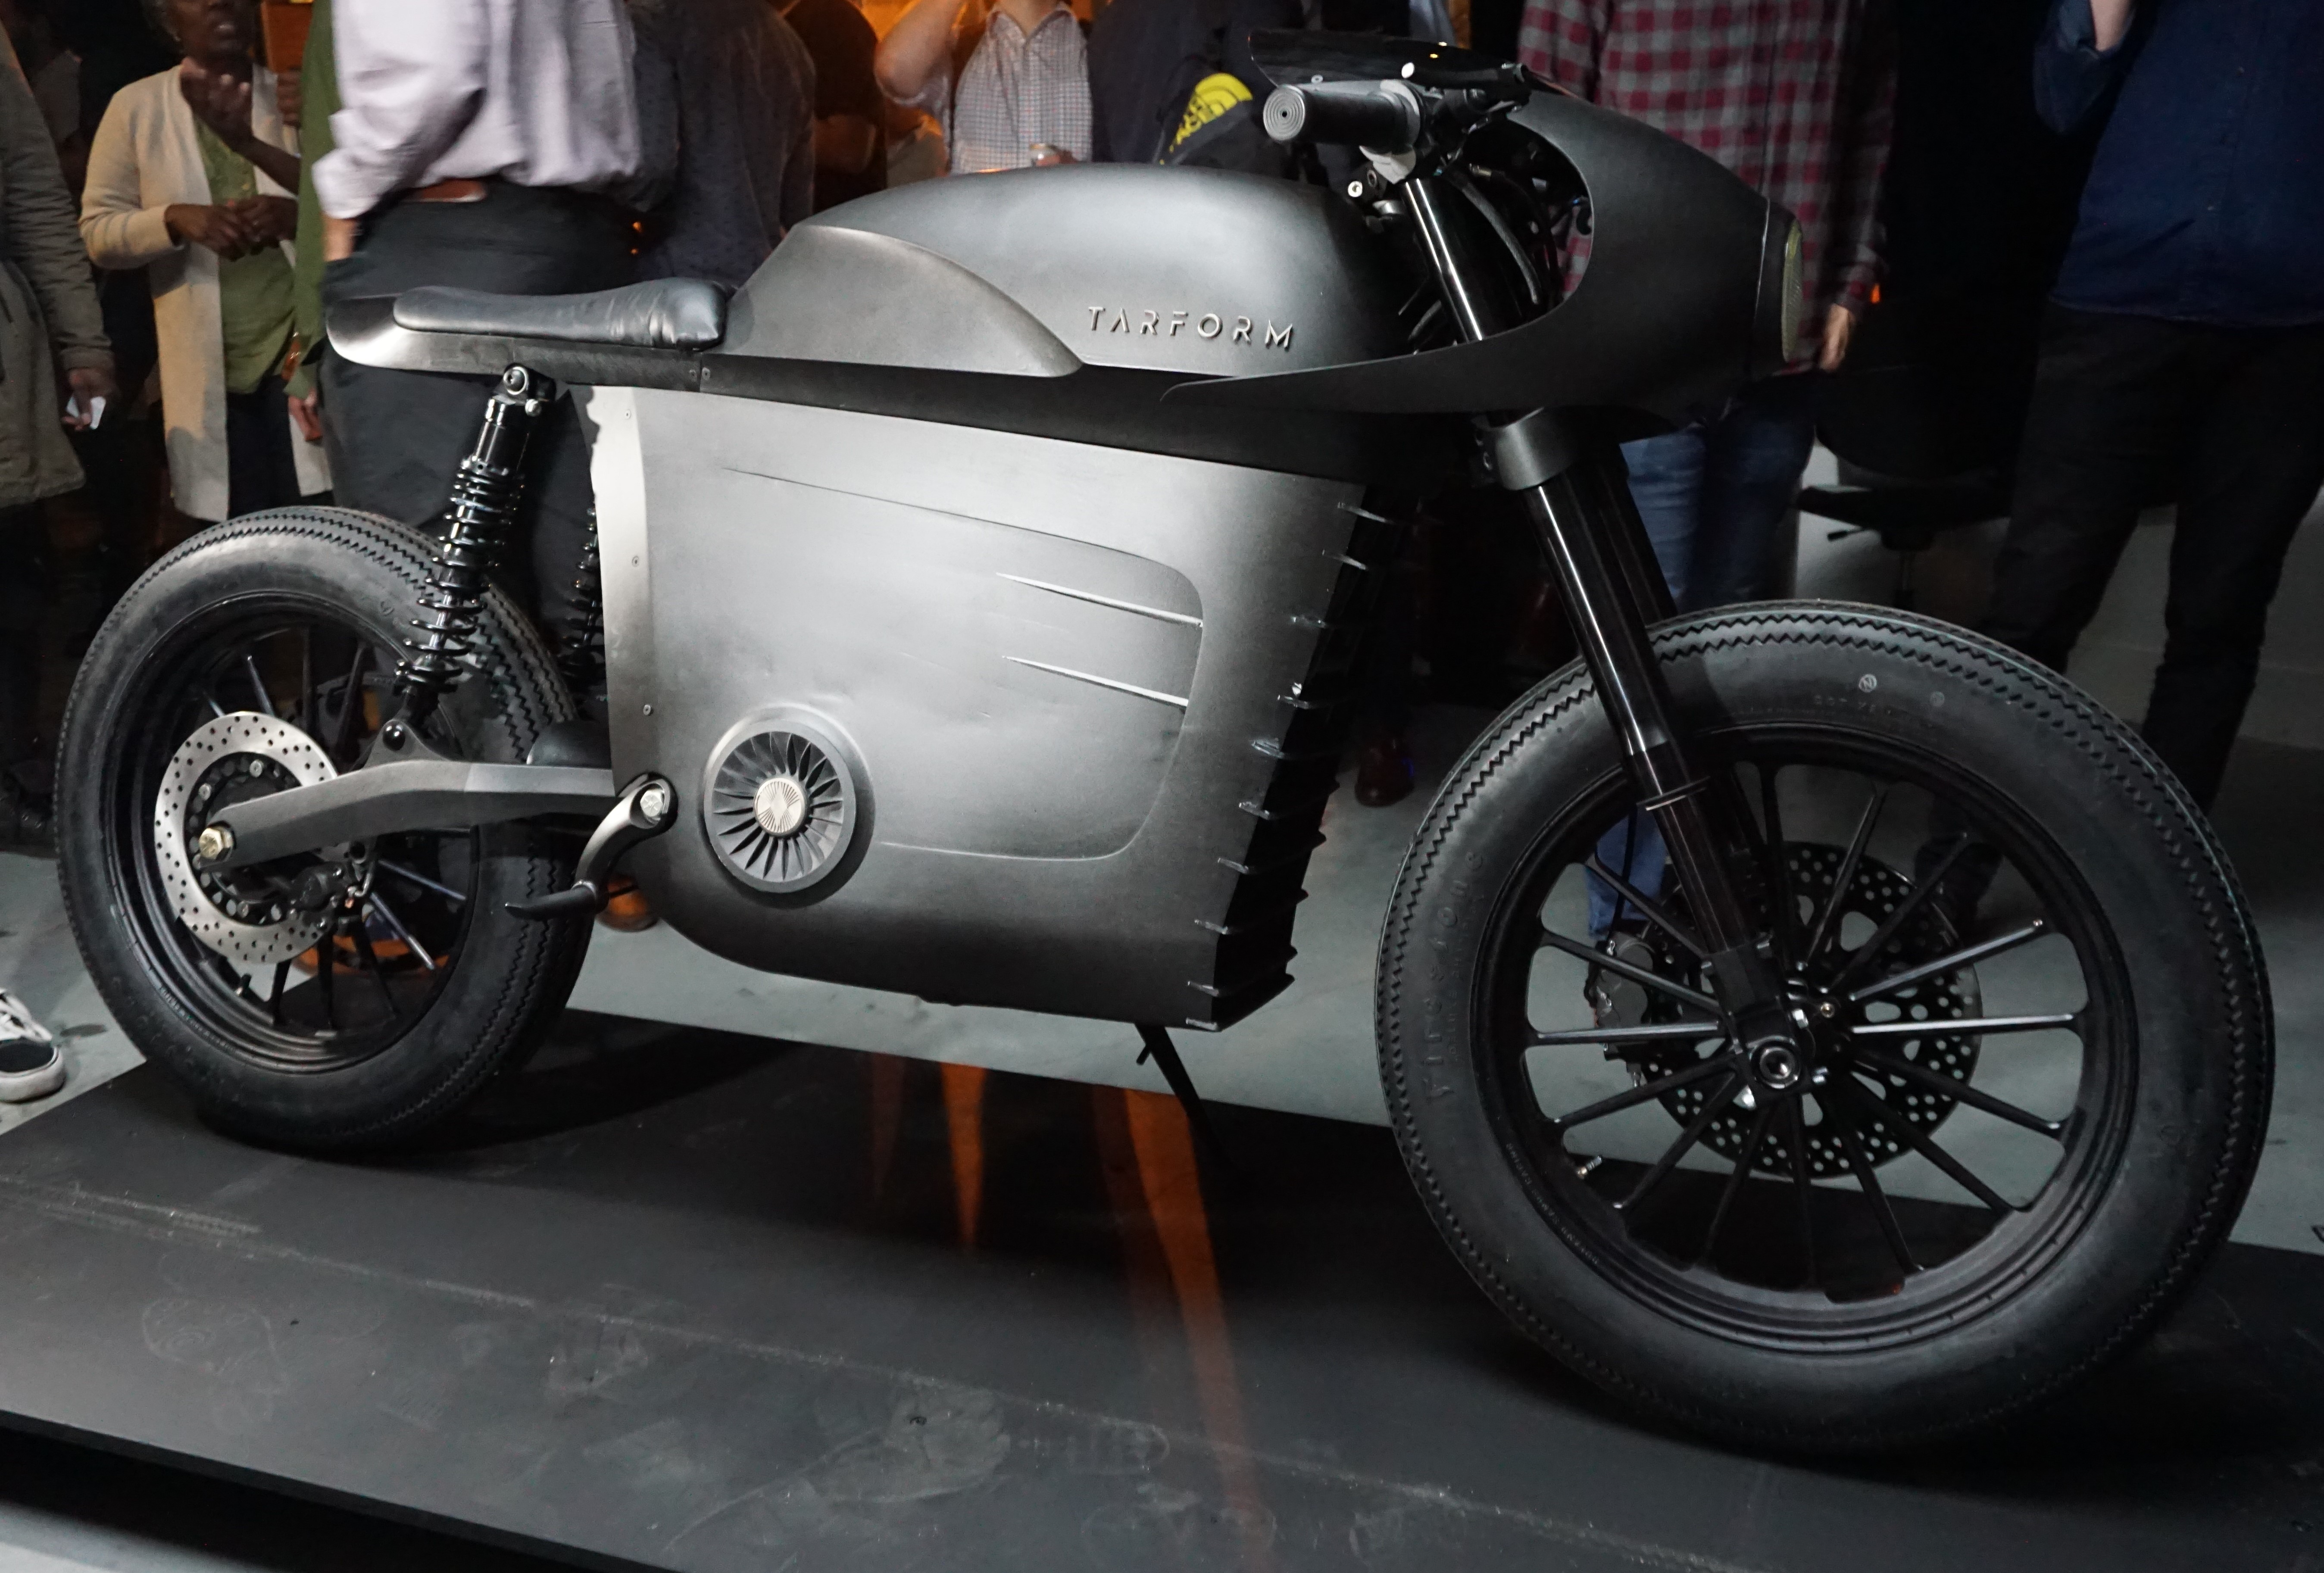 Tarform Debuted New E Motorcycles But Is There A U S Market